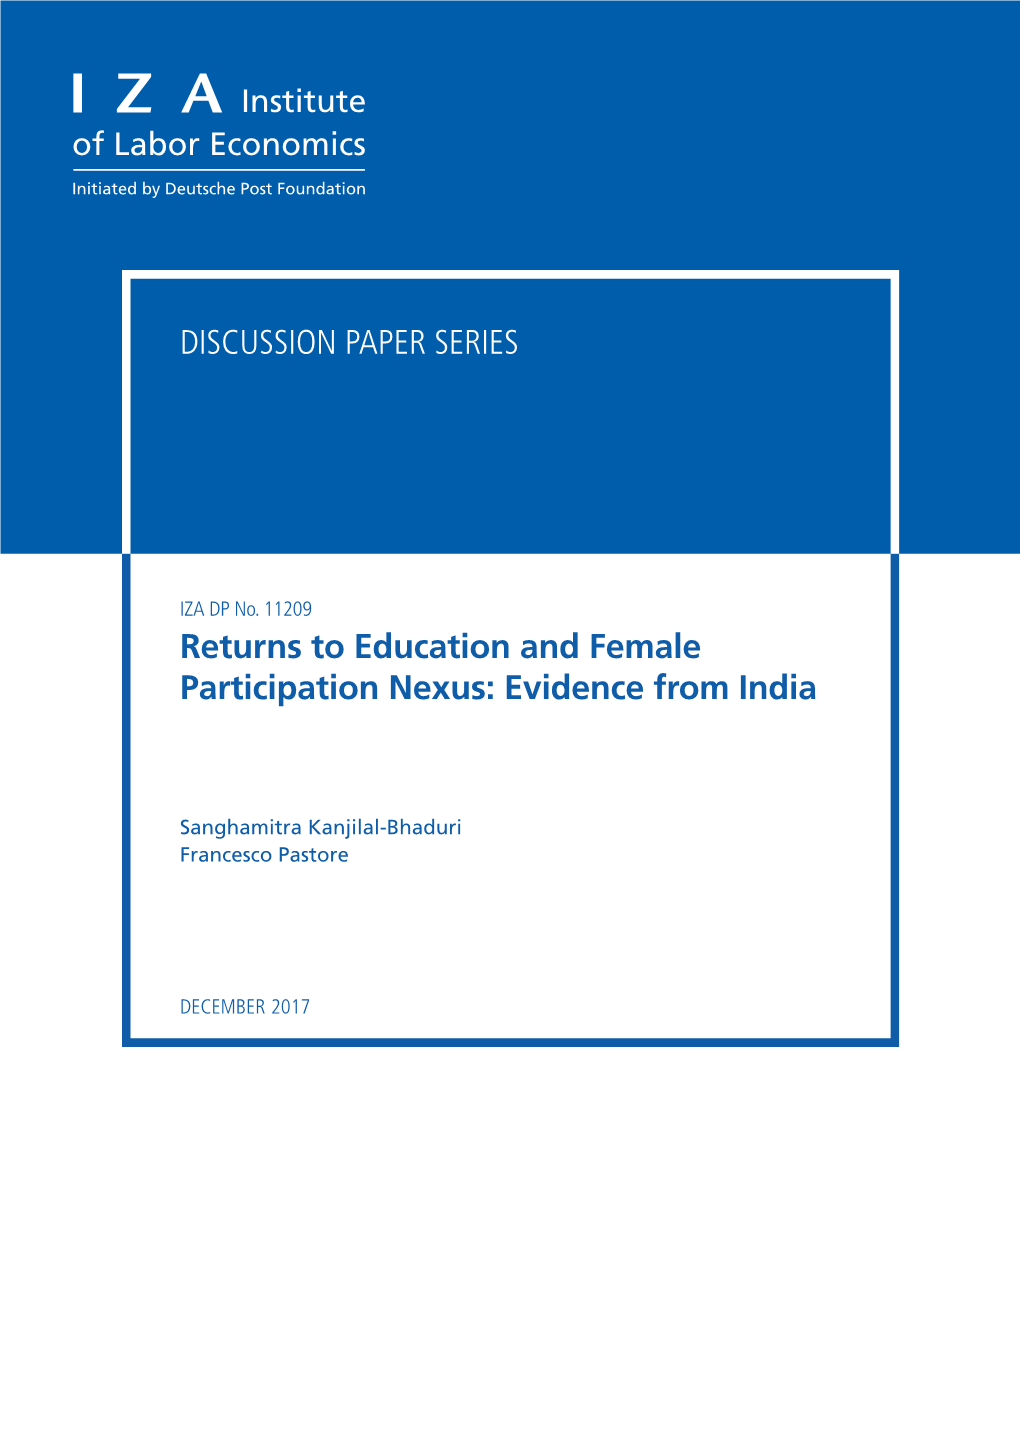 Returns to Education and Female Participation Nexus: Evidence from India